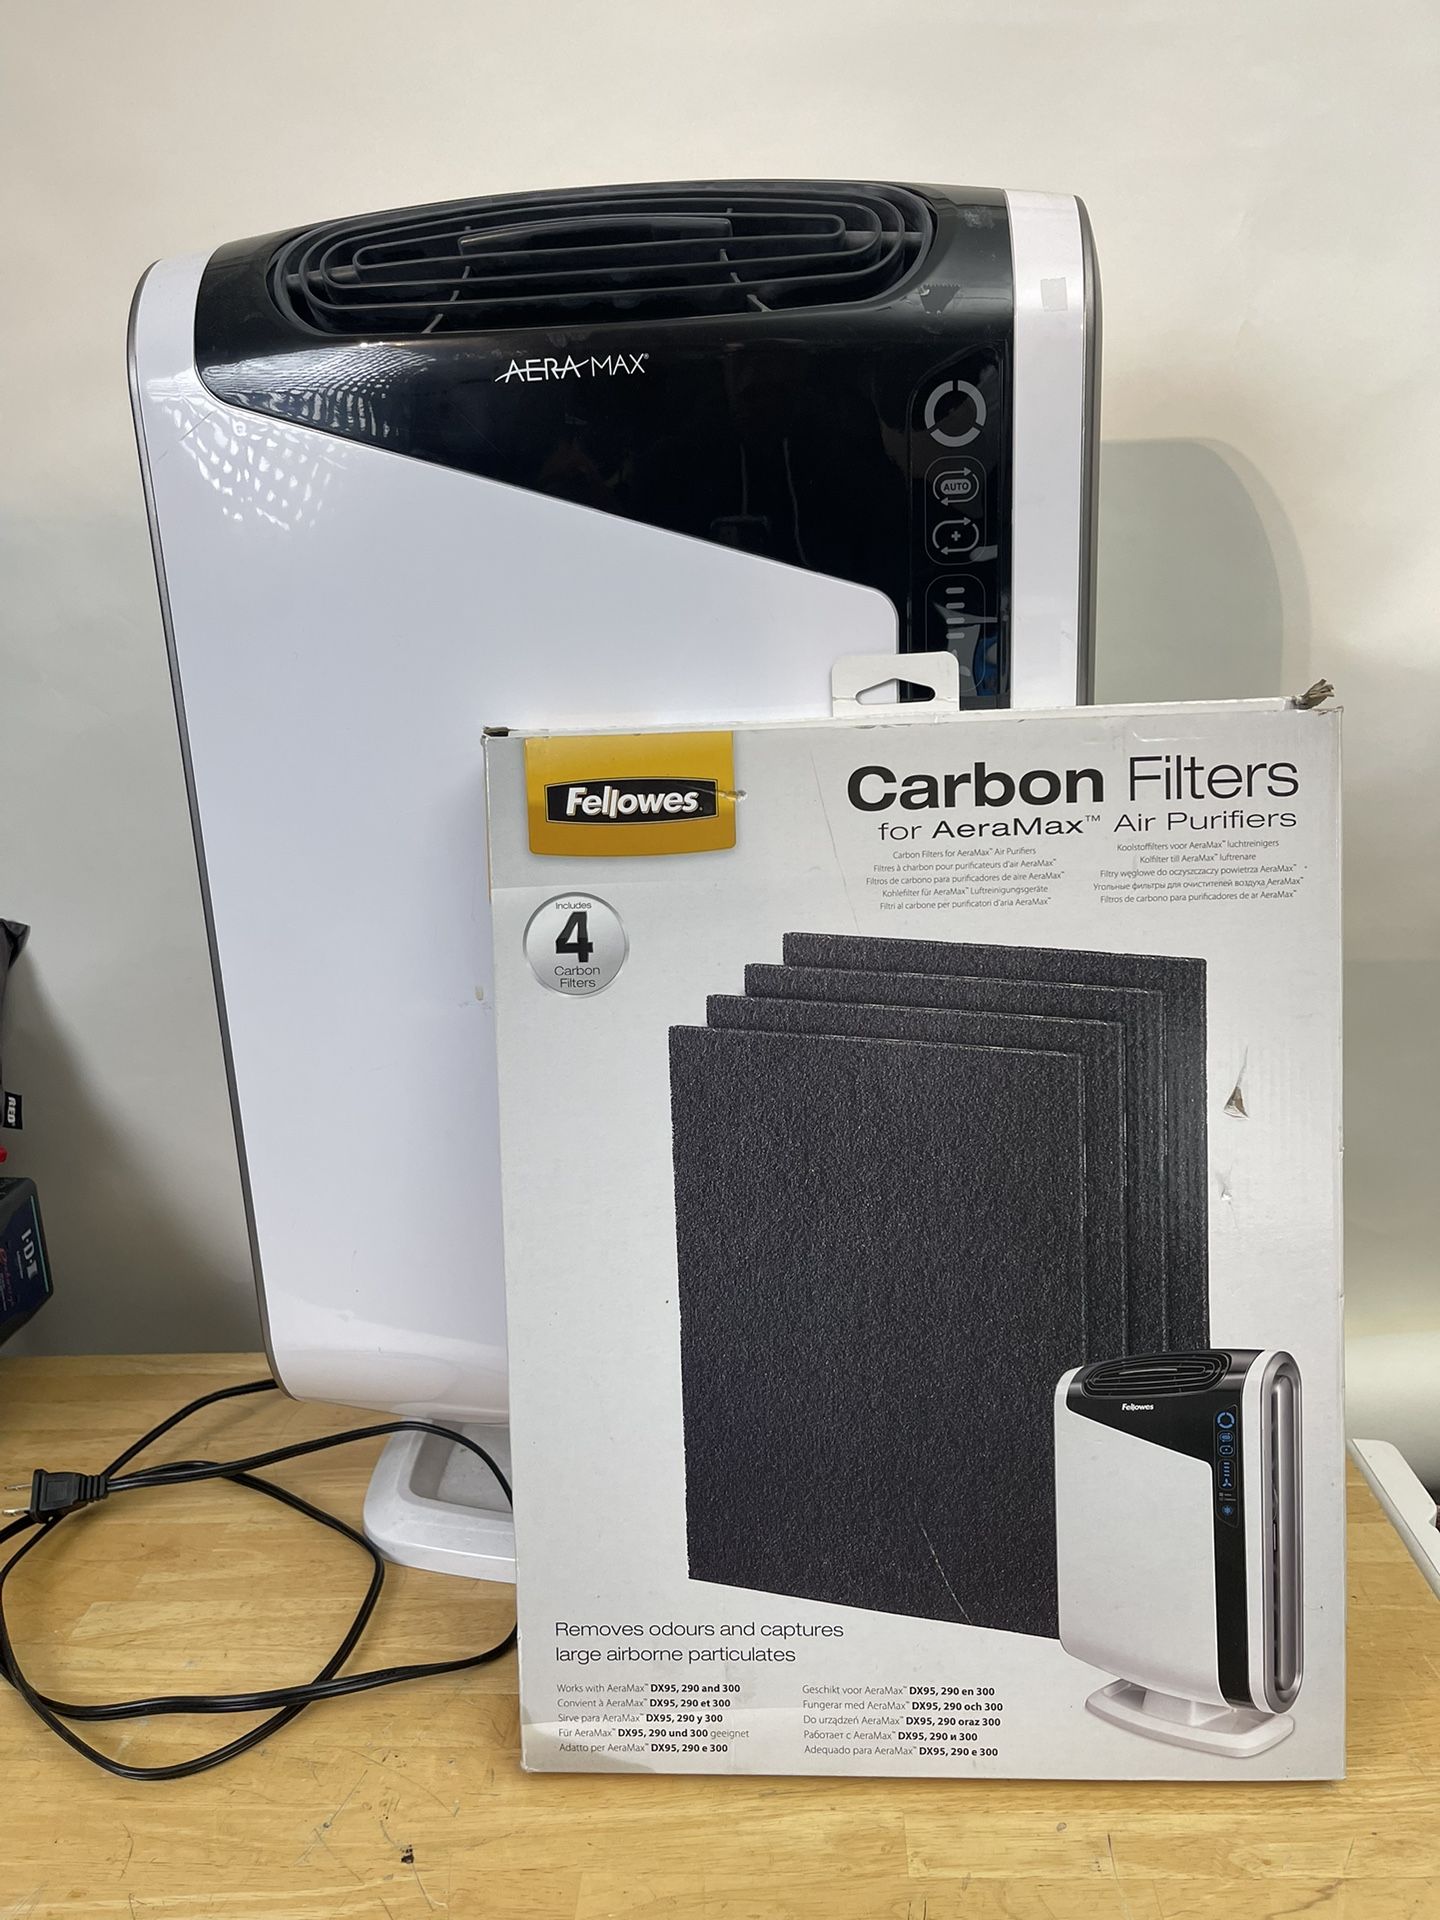 Fellowes Aera Max air filter and air purifier. Comes with 1 unused carbon filter.